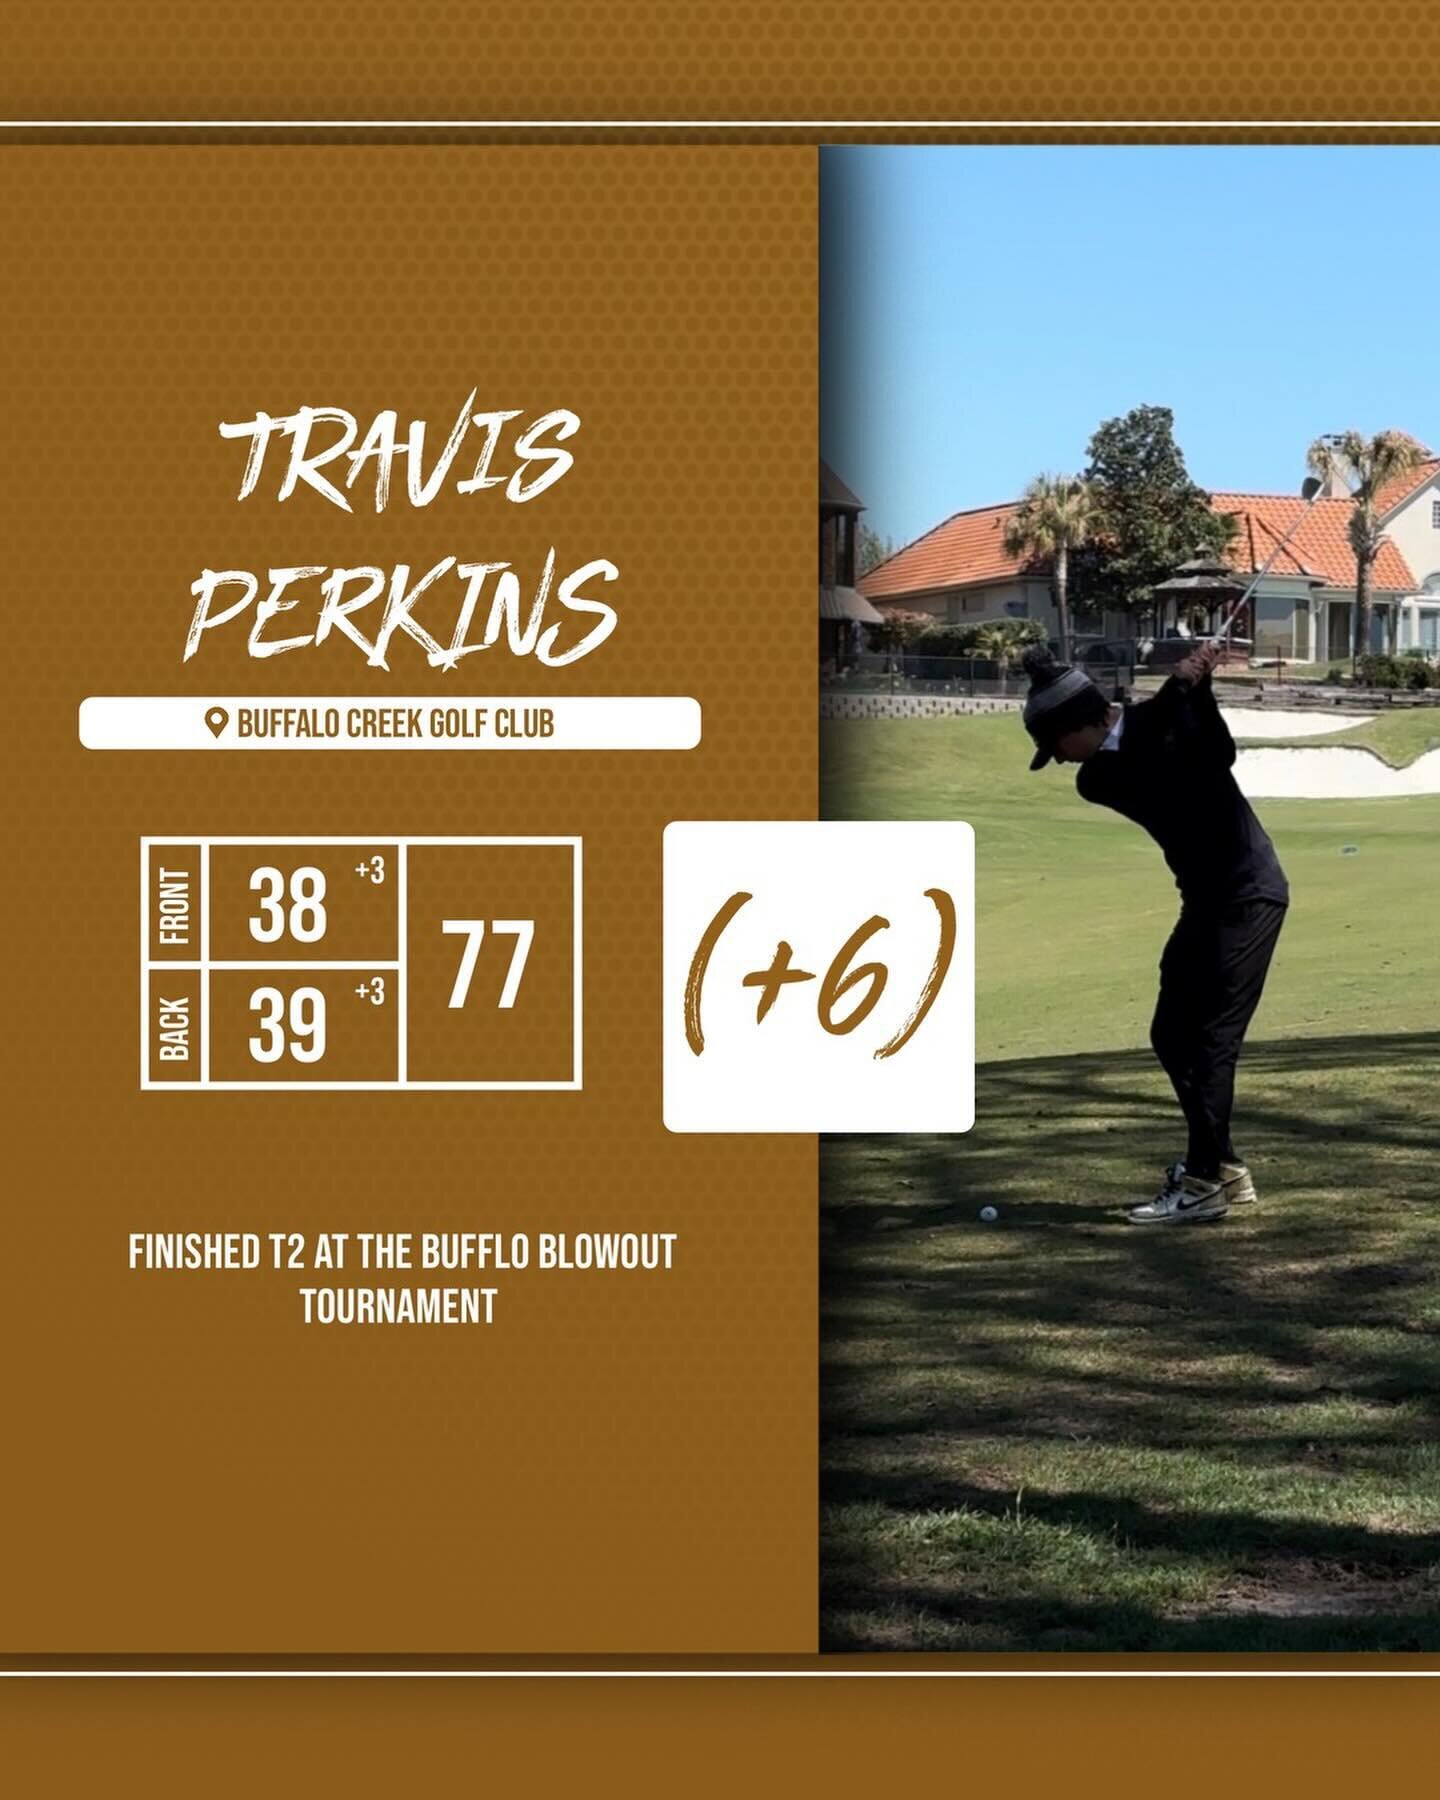 Congratulations to @_inthegolfzone student @travisperkinsgolf on great consistency in his freshman high school season! 

Great job working on the process! Many more great rounds to come. 

#golf #mentalgolf #mentalperformancecoach #texasgolf #juniorg